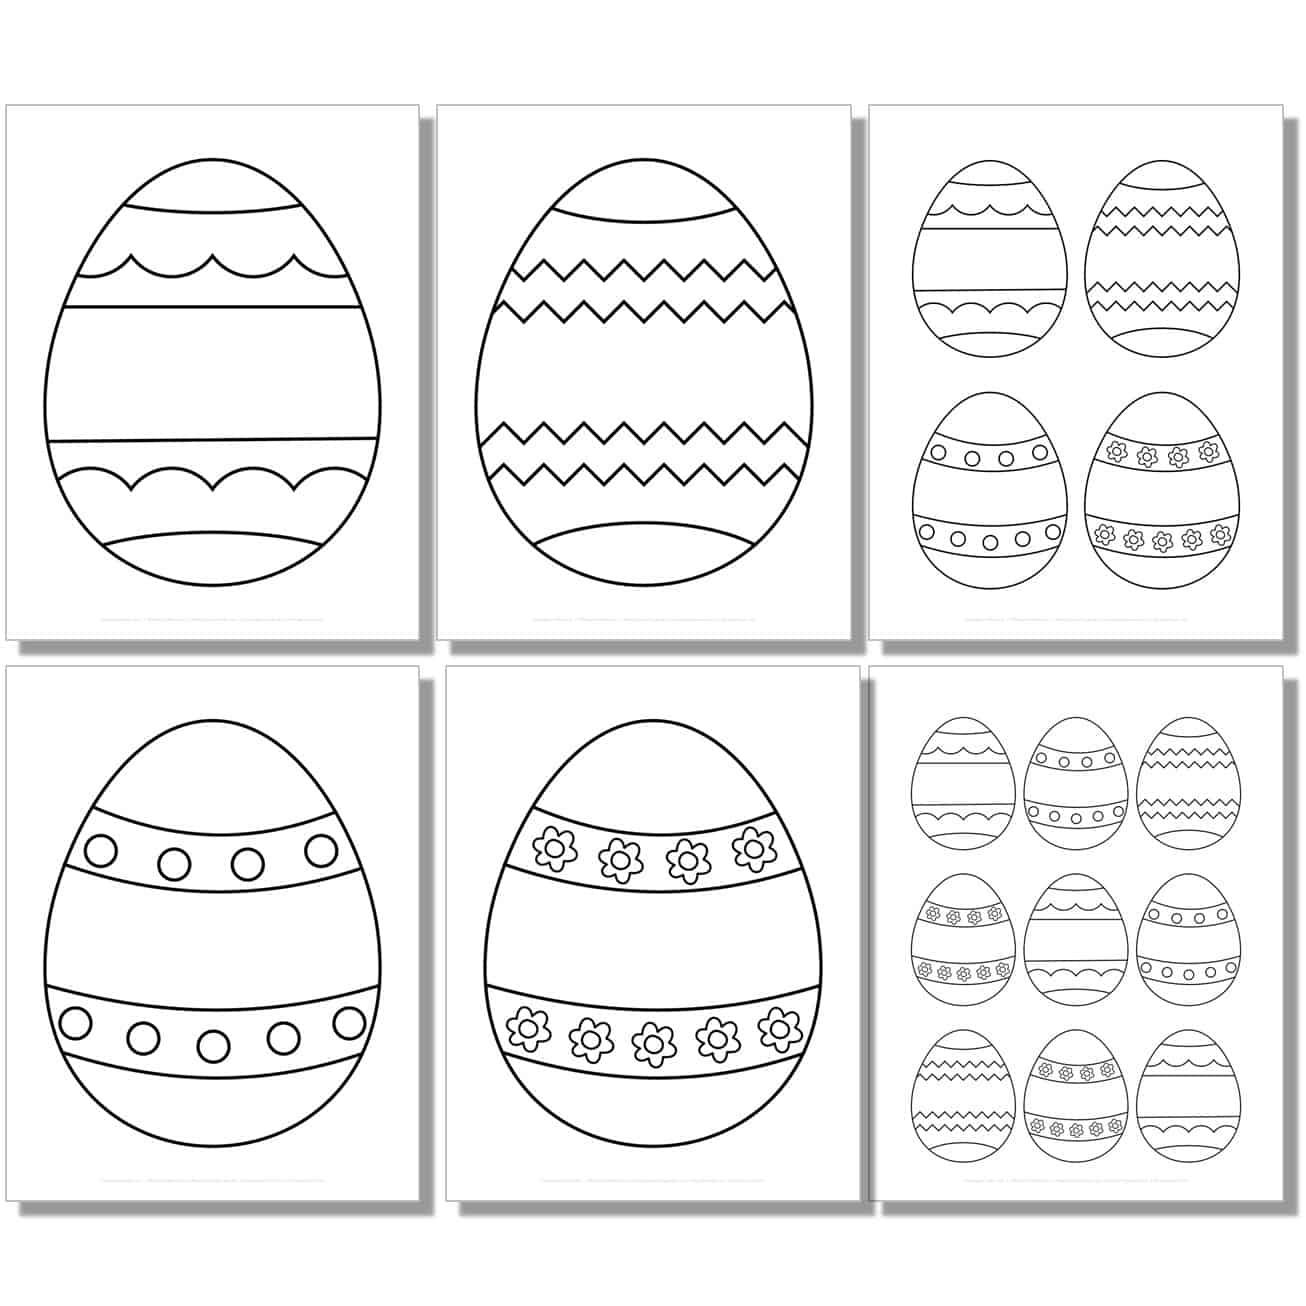 large, medium, small easter egg label templates, outlines, stencils.